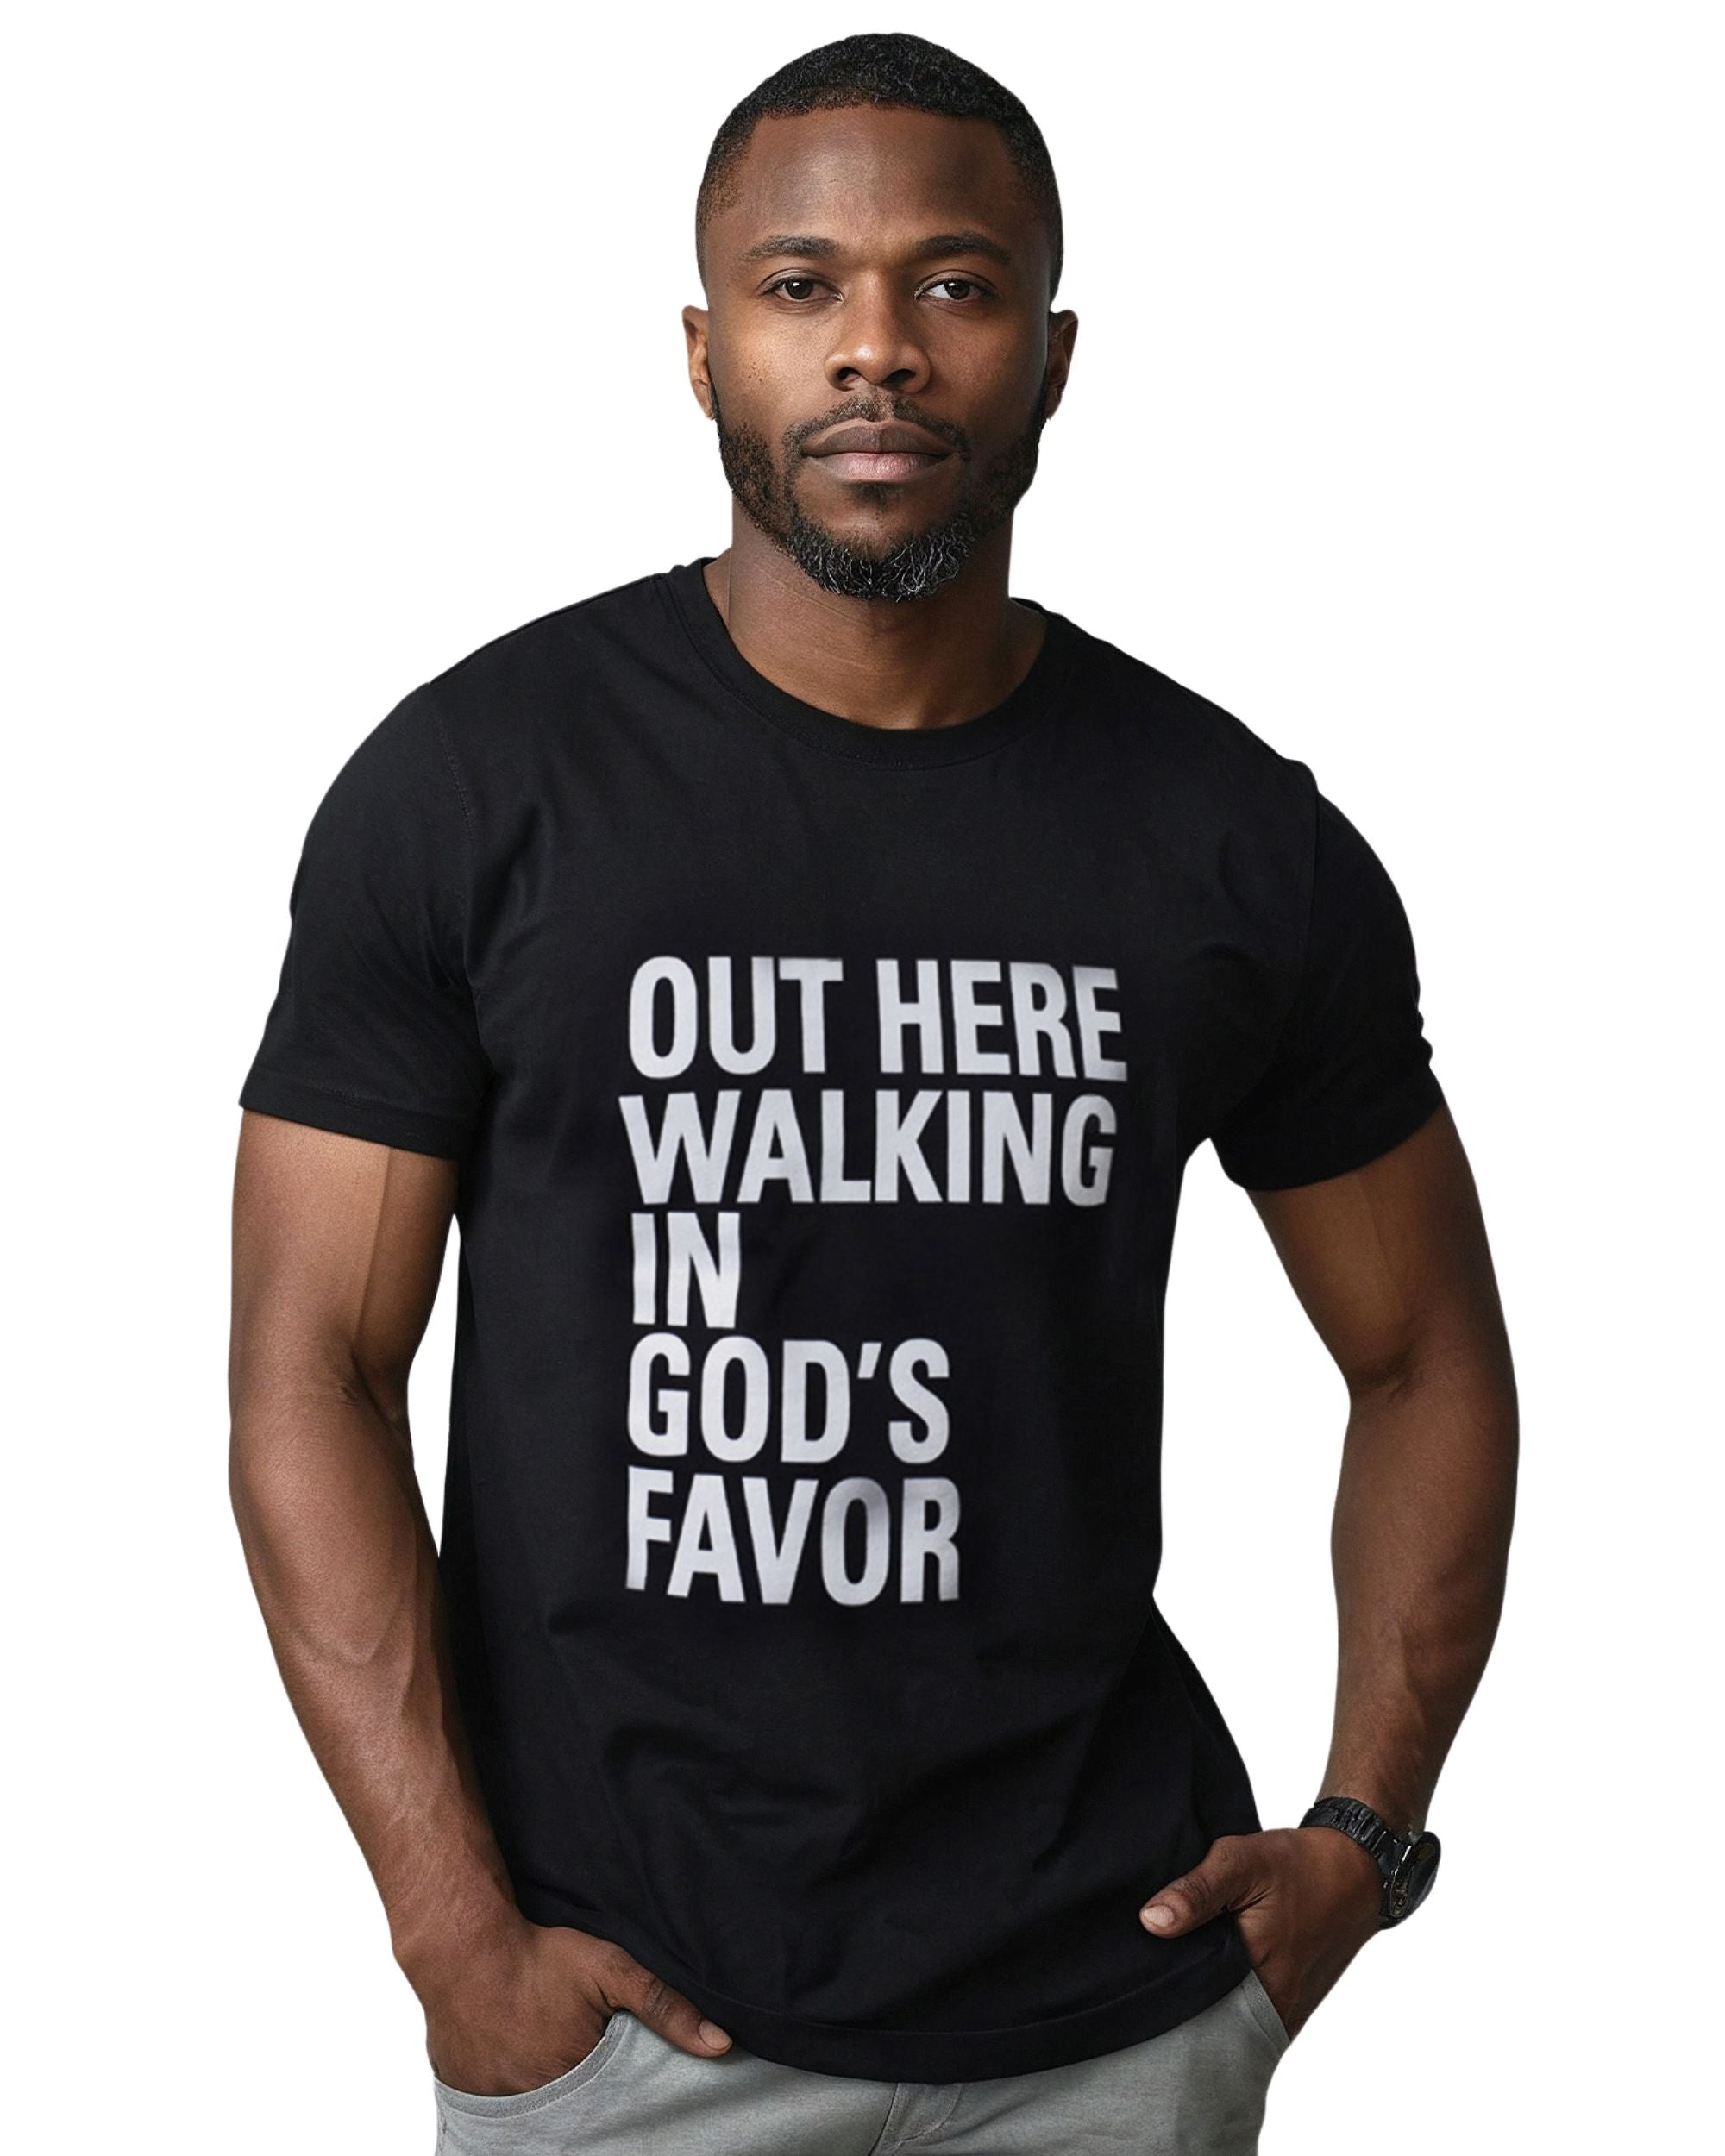 Walking In God's Favor Original Tee, Used By God, Used By God Clothing, Christian Apparel, Christian T-Shirts, Christian Shirts, christian t shirts for women, Men's Christian T-Shirt, Christian Clothing, God Shirts, christian clothing t shirts, Christian Sweatshirts, womens christian t shirts, t-shirts about jesus, God Clothing, Jesus Hoodie, Jesus Clothes, God Is Dope, Art Of Homage, Red Letter Clothing, Elevated Faith, Beacon Threads, God The Father Apparel